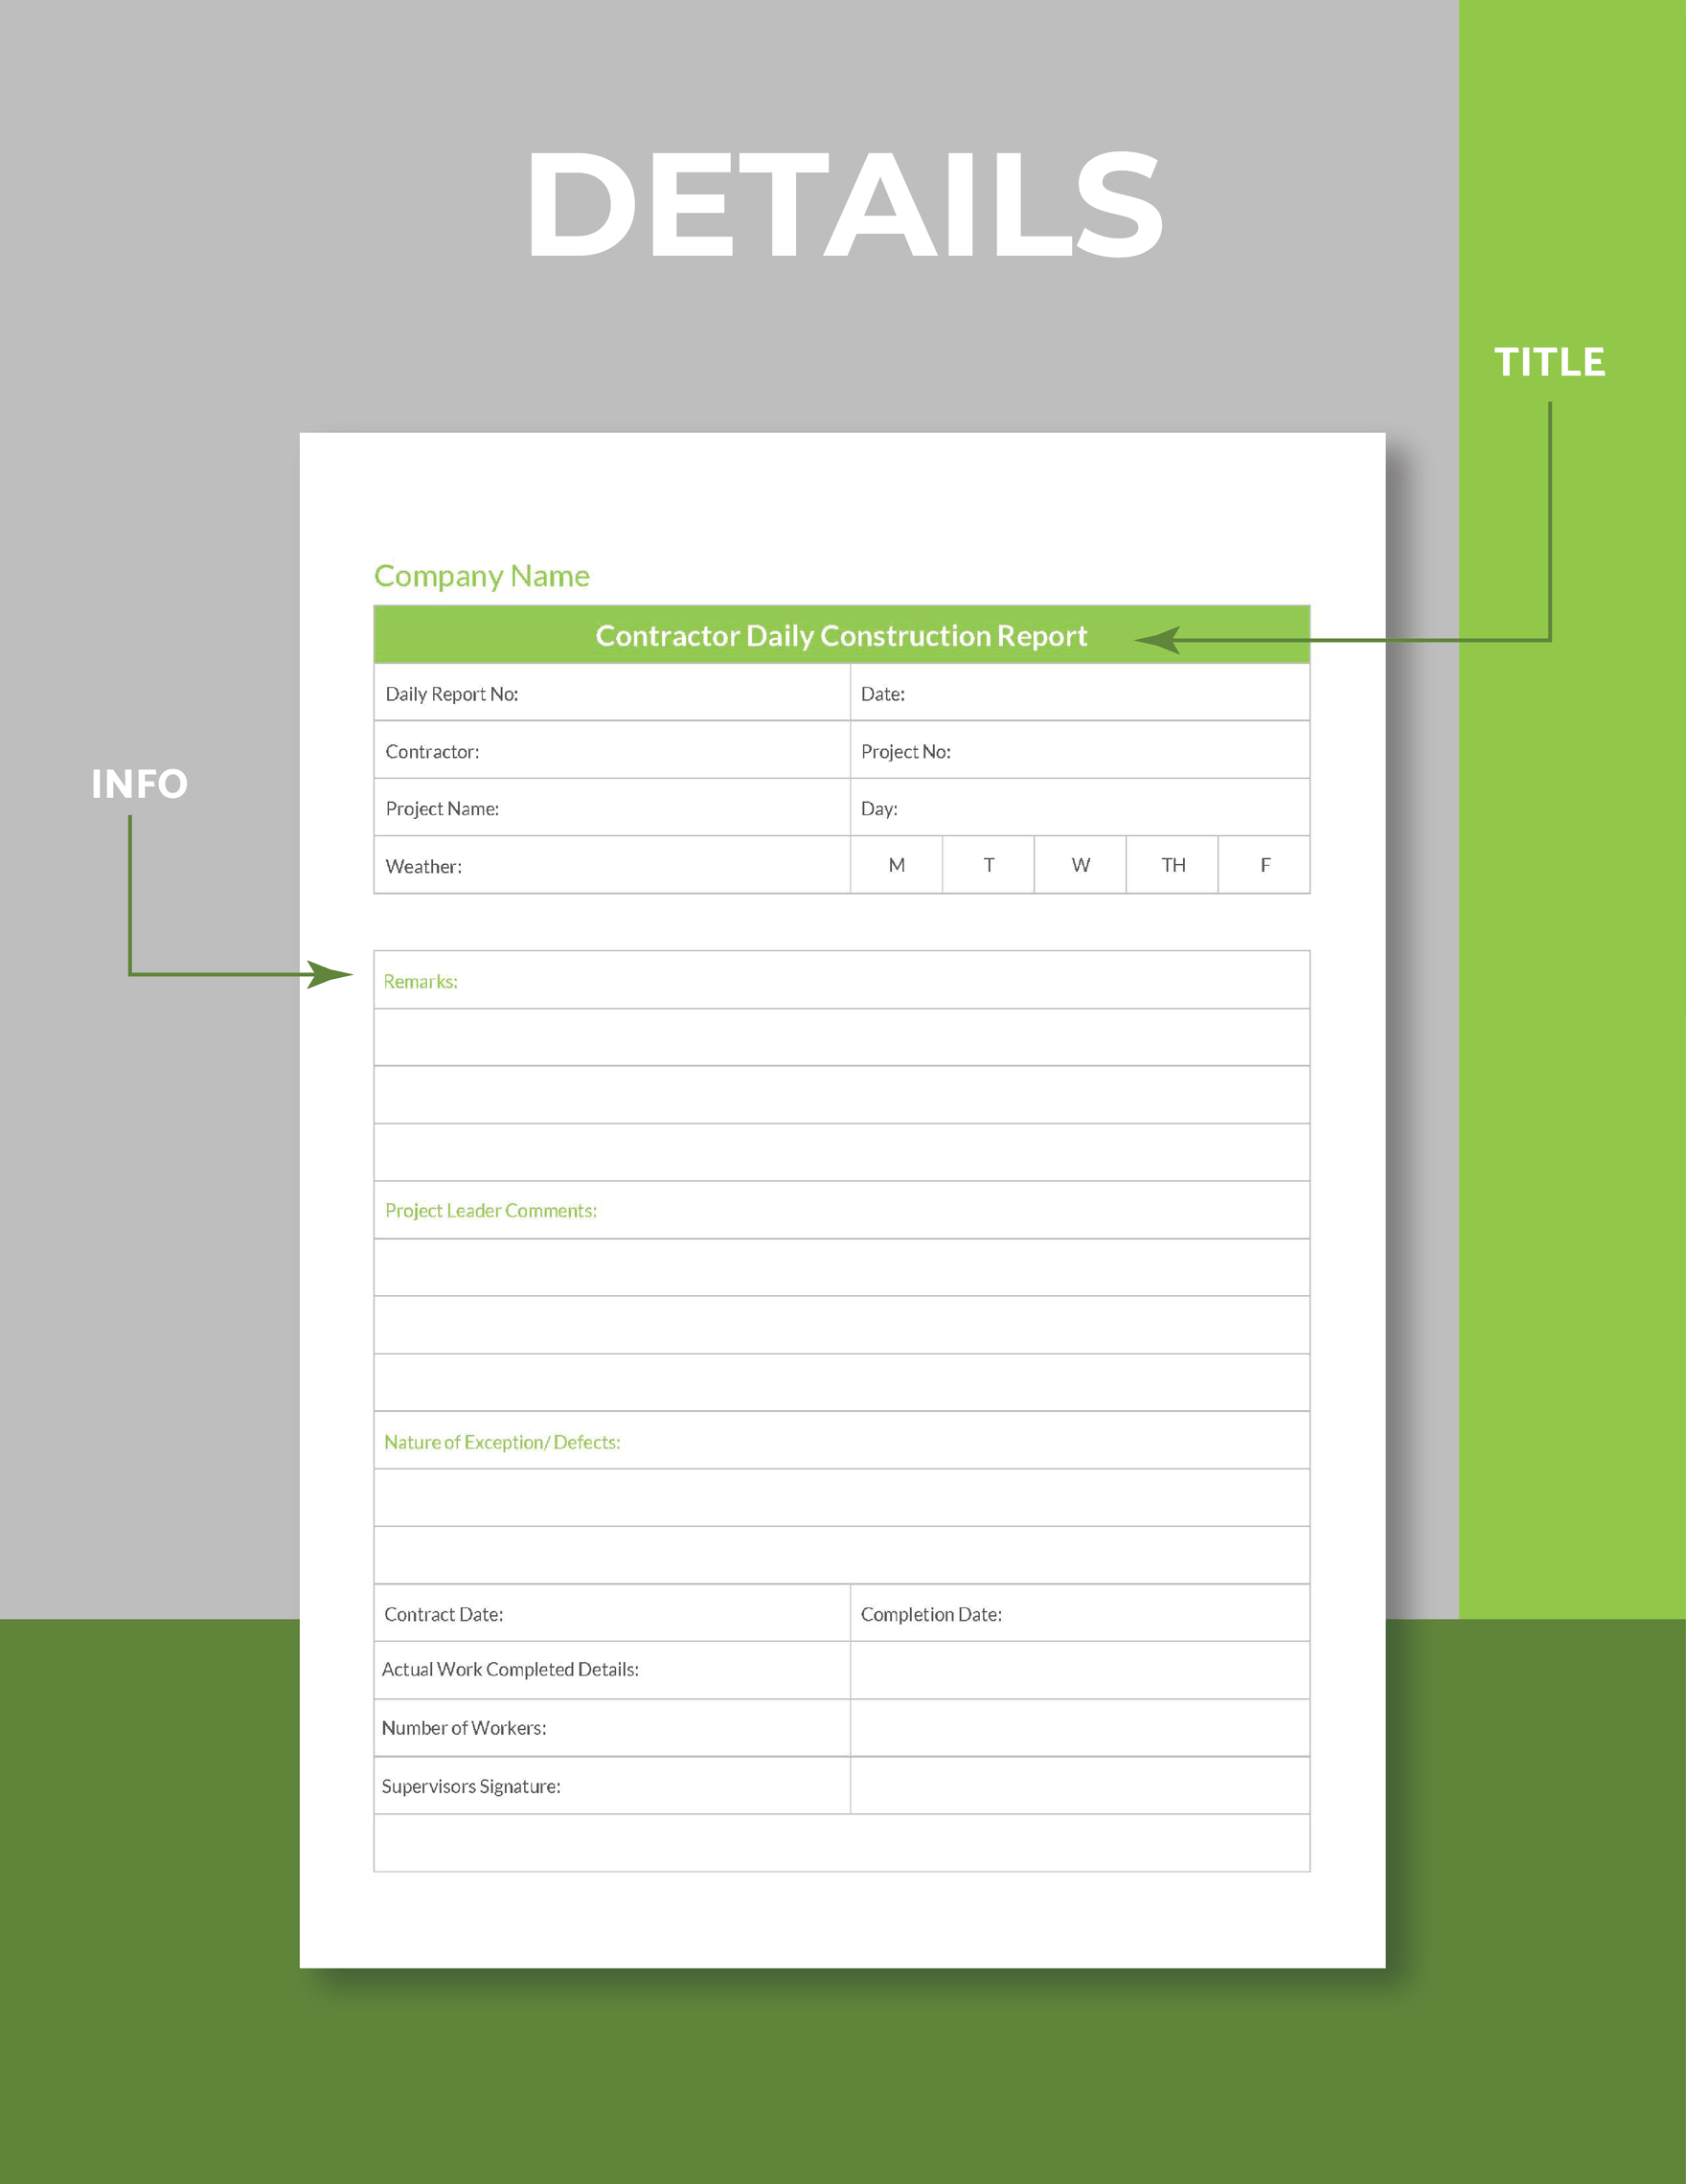 Contractor Daily Construction Report Template